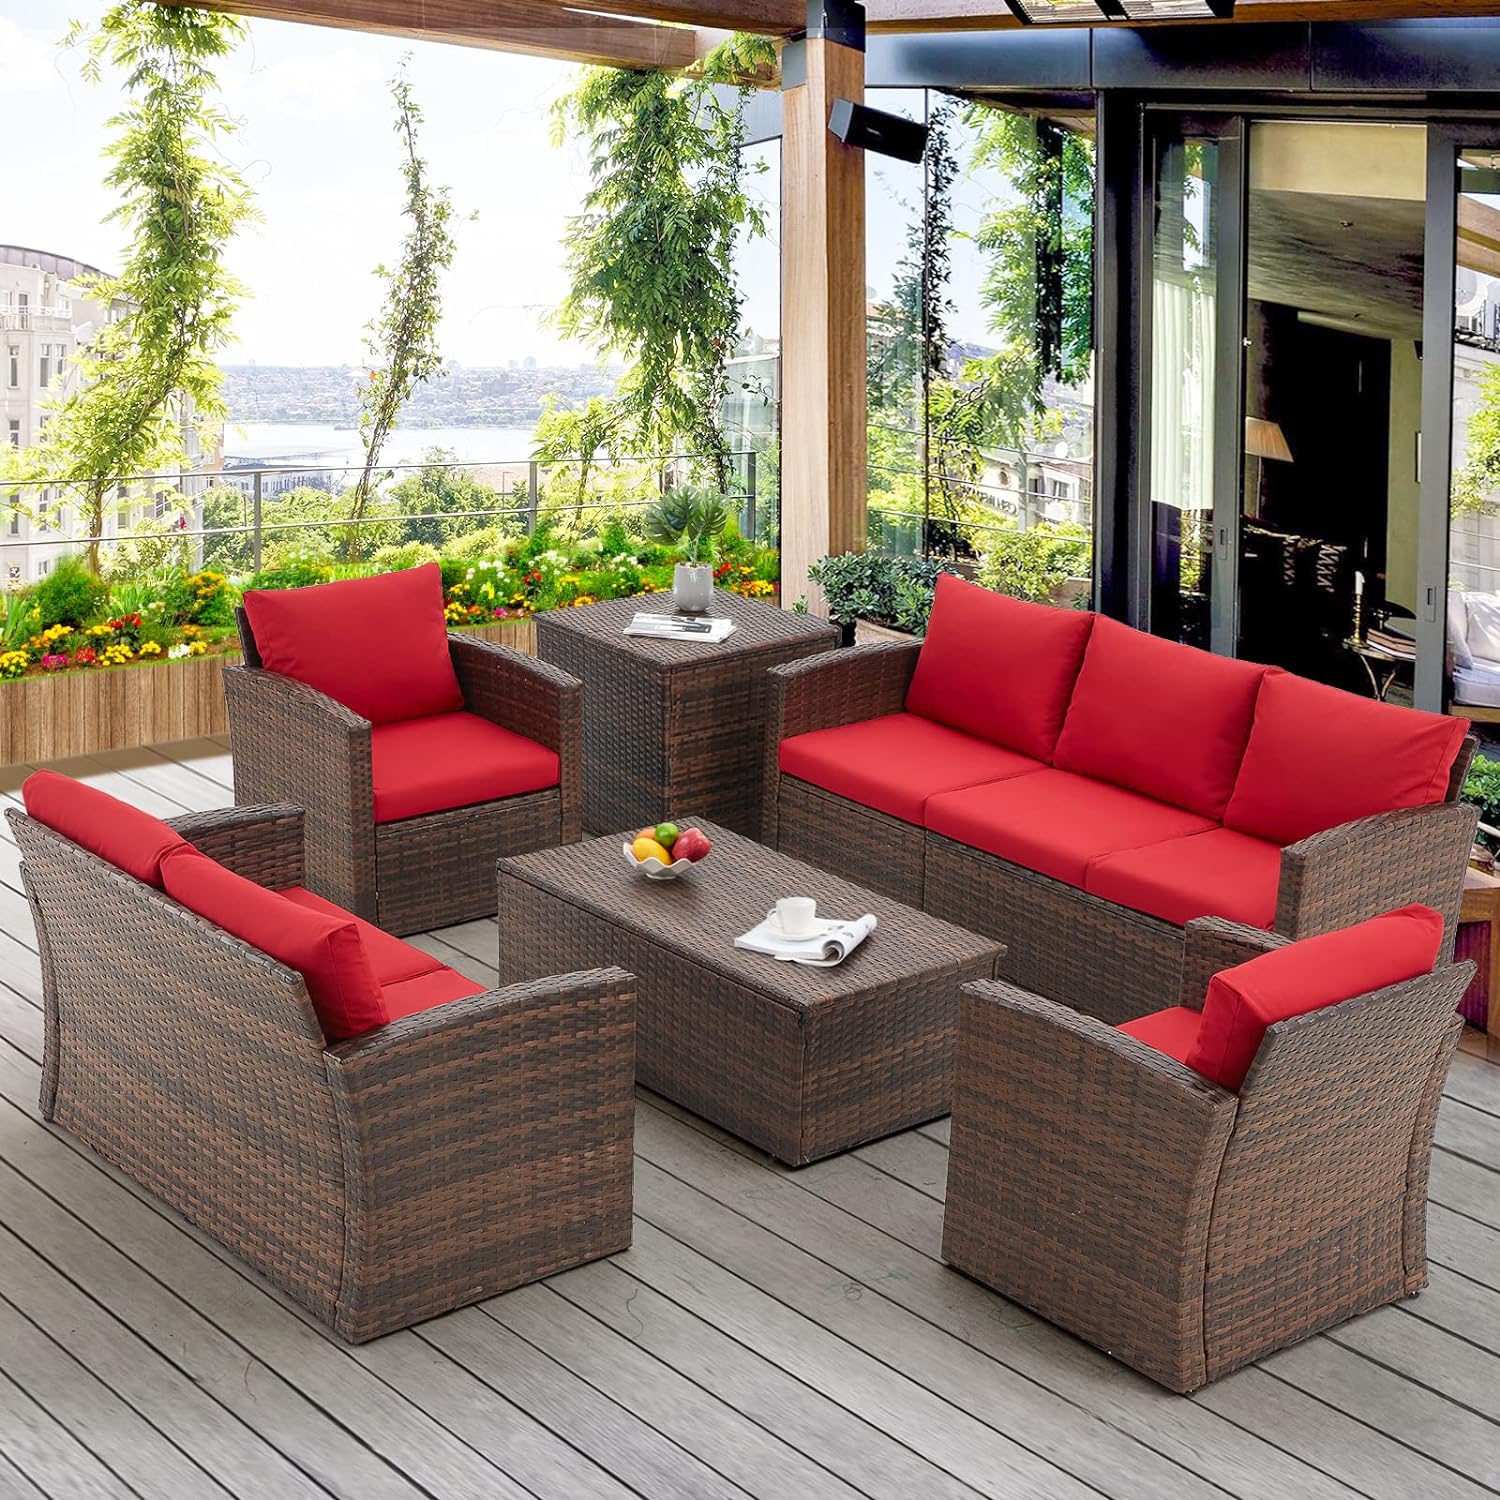 AECOJOY 7 Pieces Patio Furniture Set with Two Storage Boxes, Outdoor Wicker Sectional Sofa, All-Weather Rattan Conversation Set for Garden, Backyard, Red Cushion&Brown Rattan